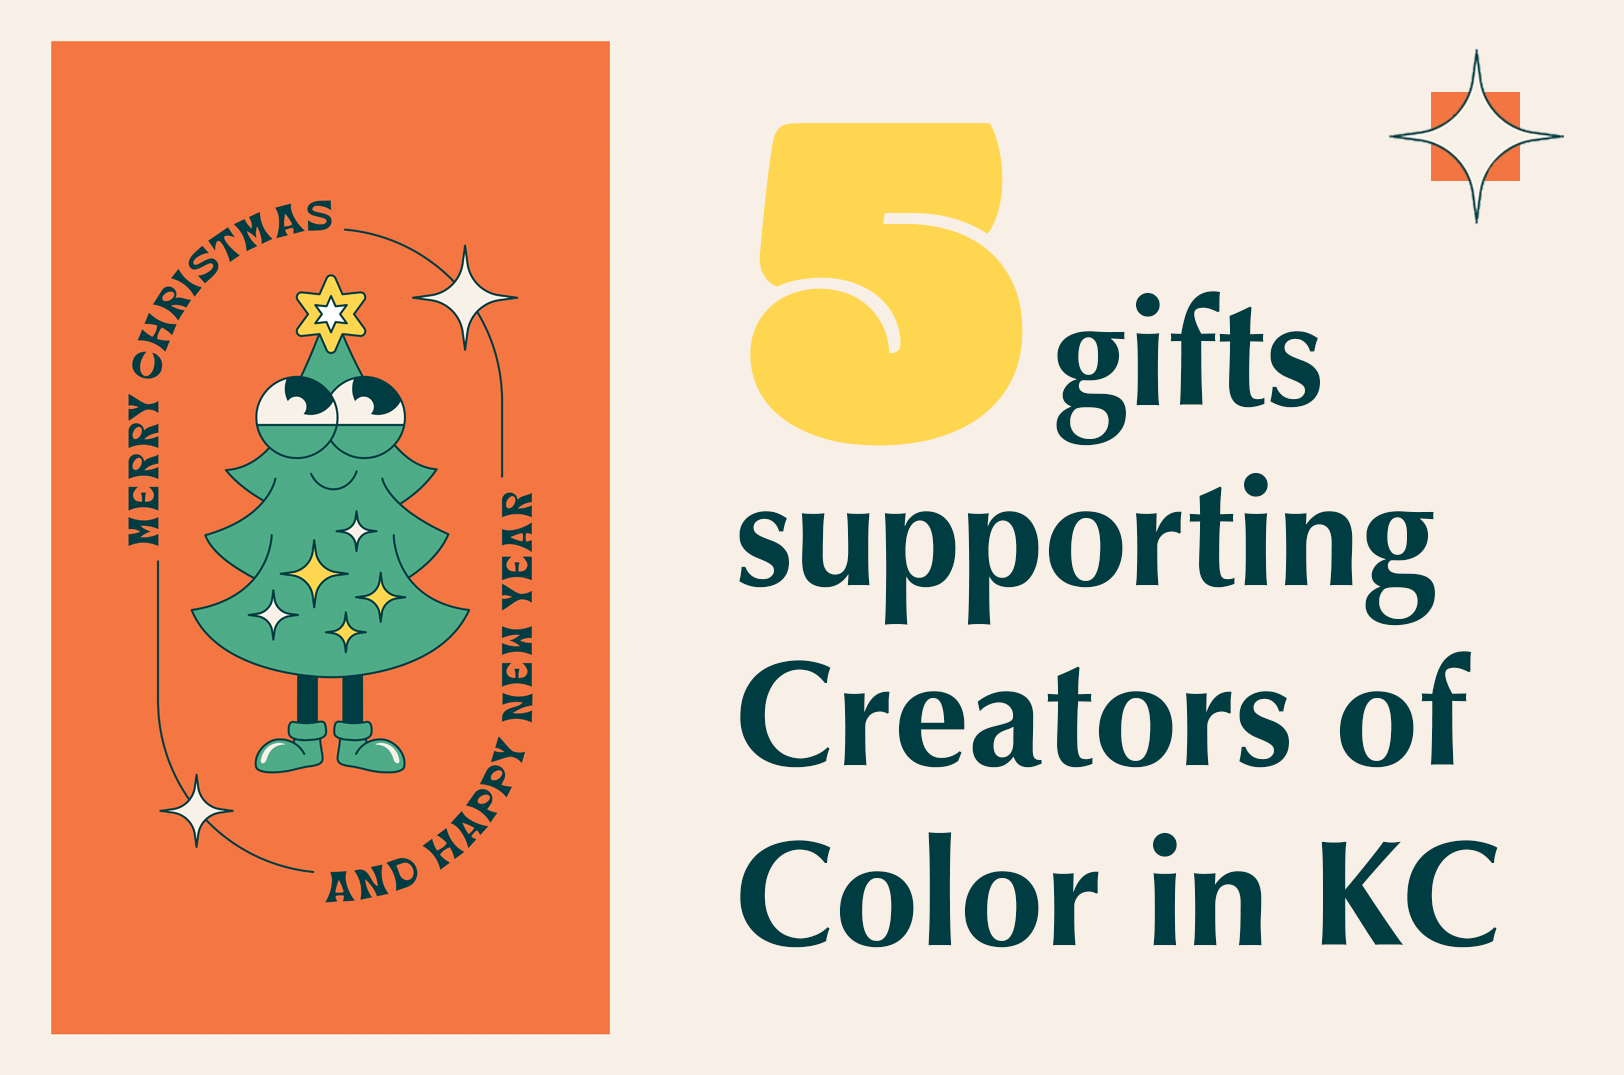 Shop Small: 5 gifts supporting creators of Color in KC (KC Gift Guide)